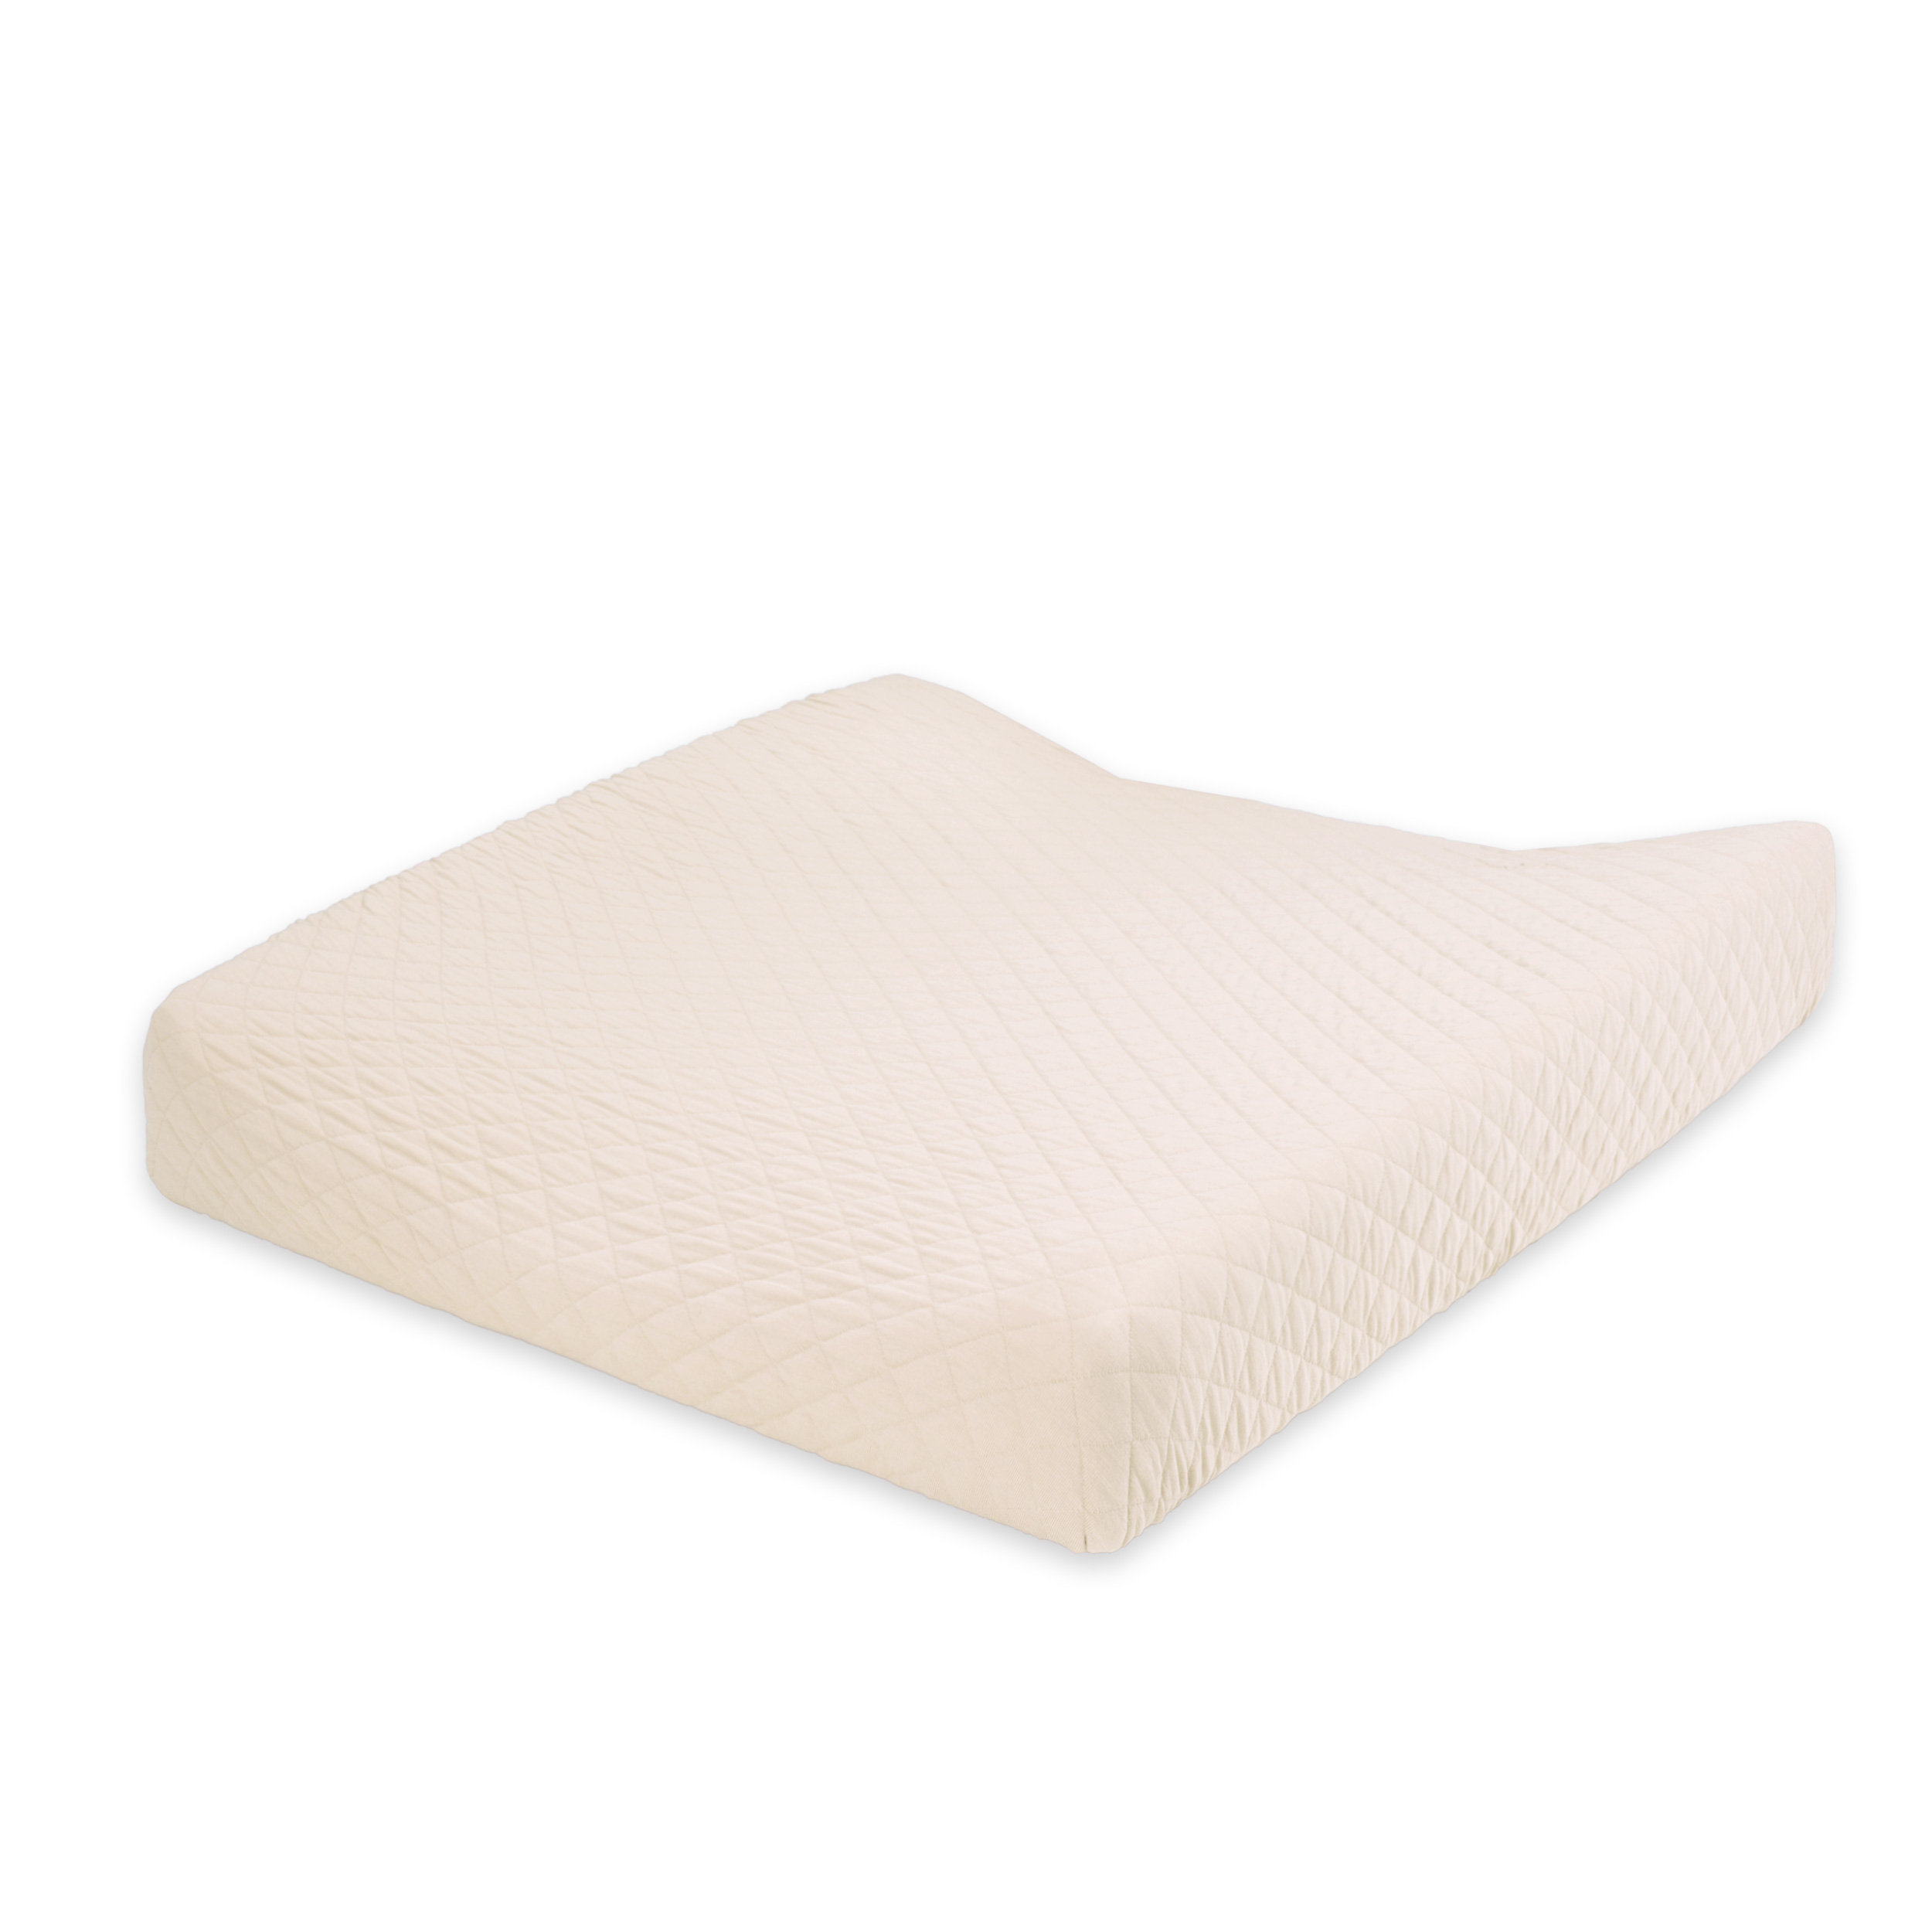 Funda protector cambiador Pady quilted jersey 50x75cm QUILT Cream